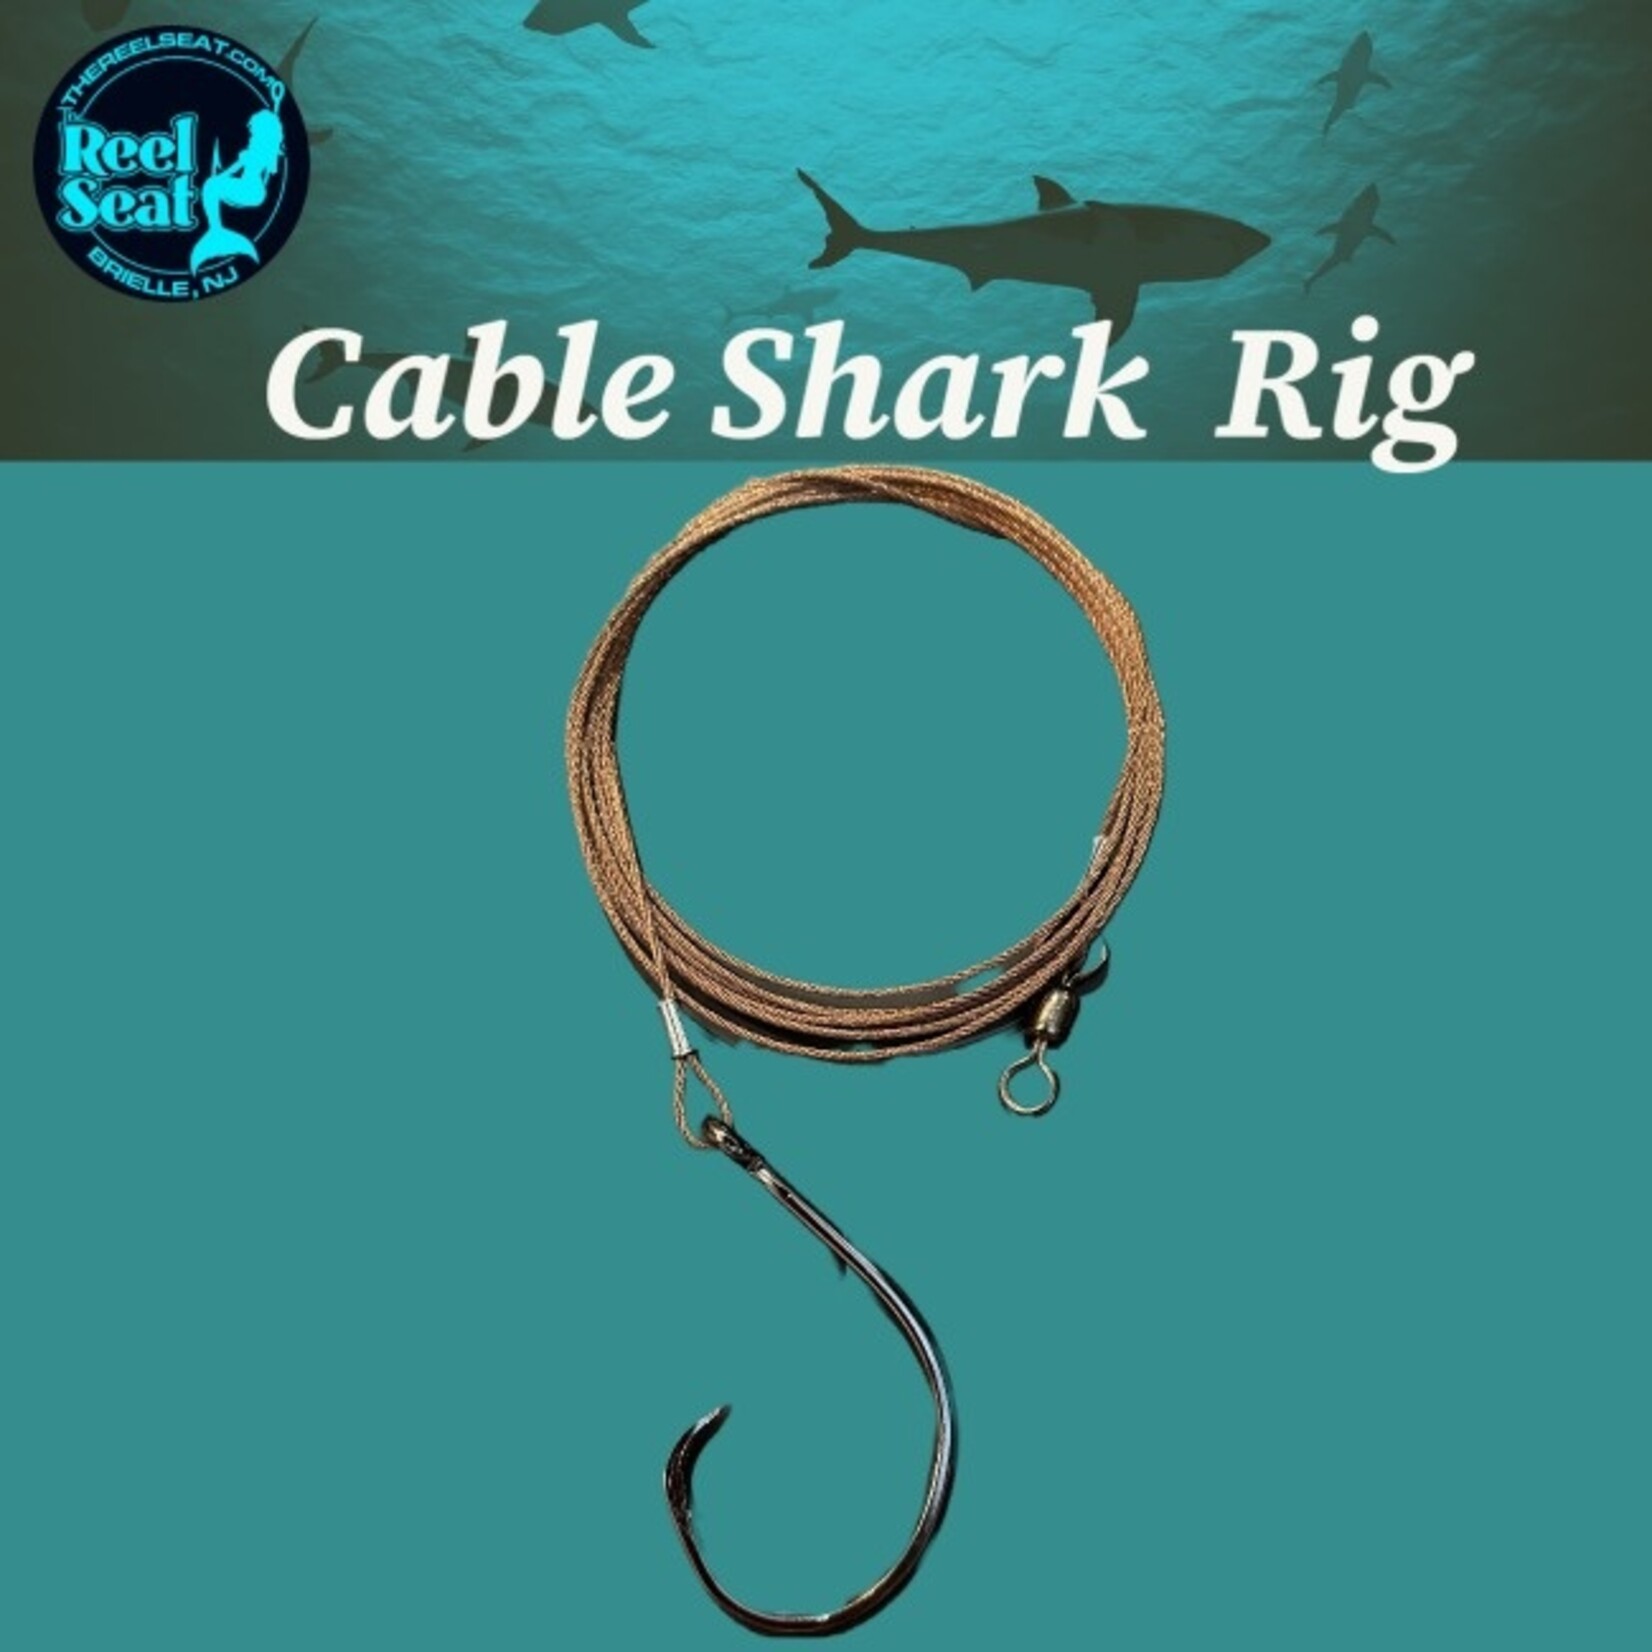 The Reel Seat RS Cable Shark Rig